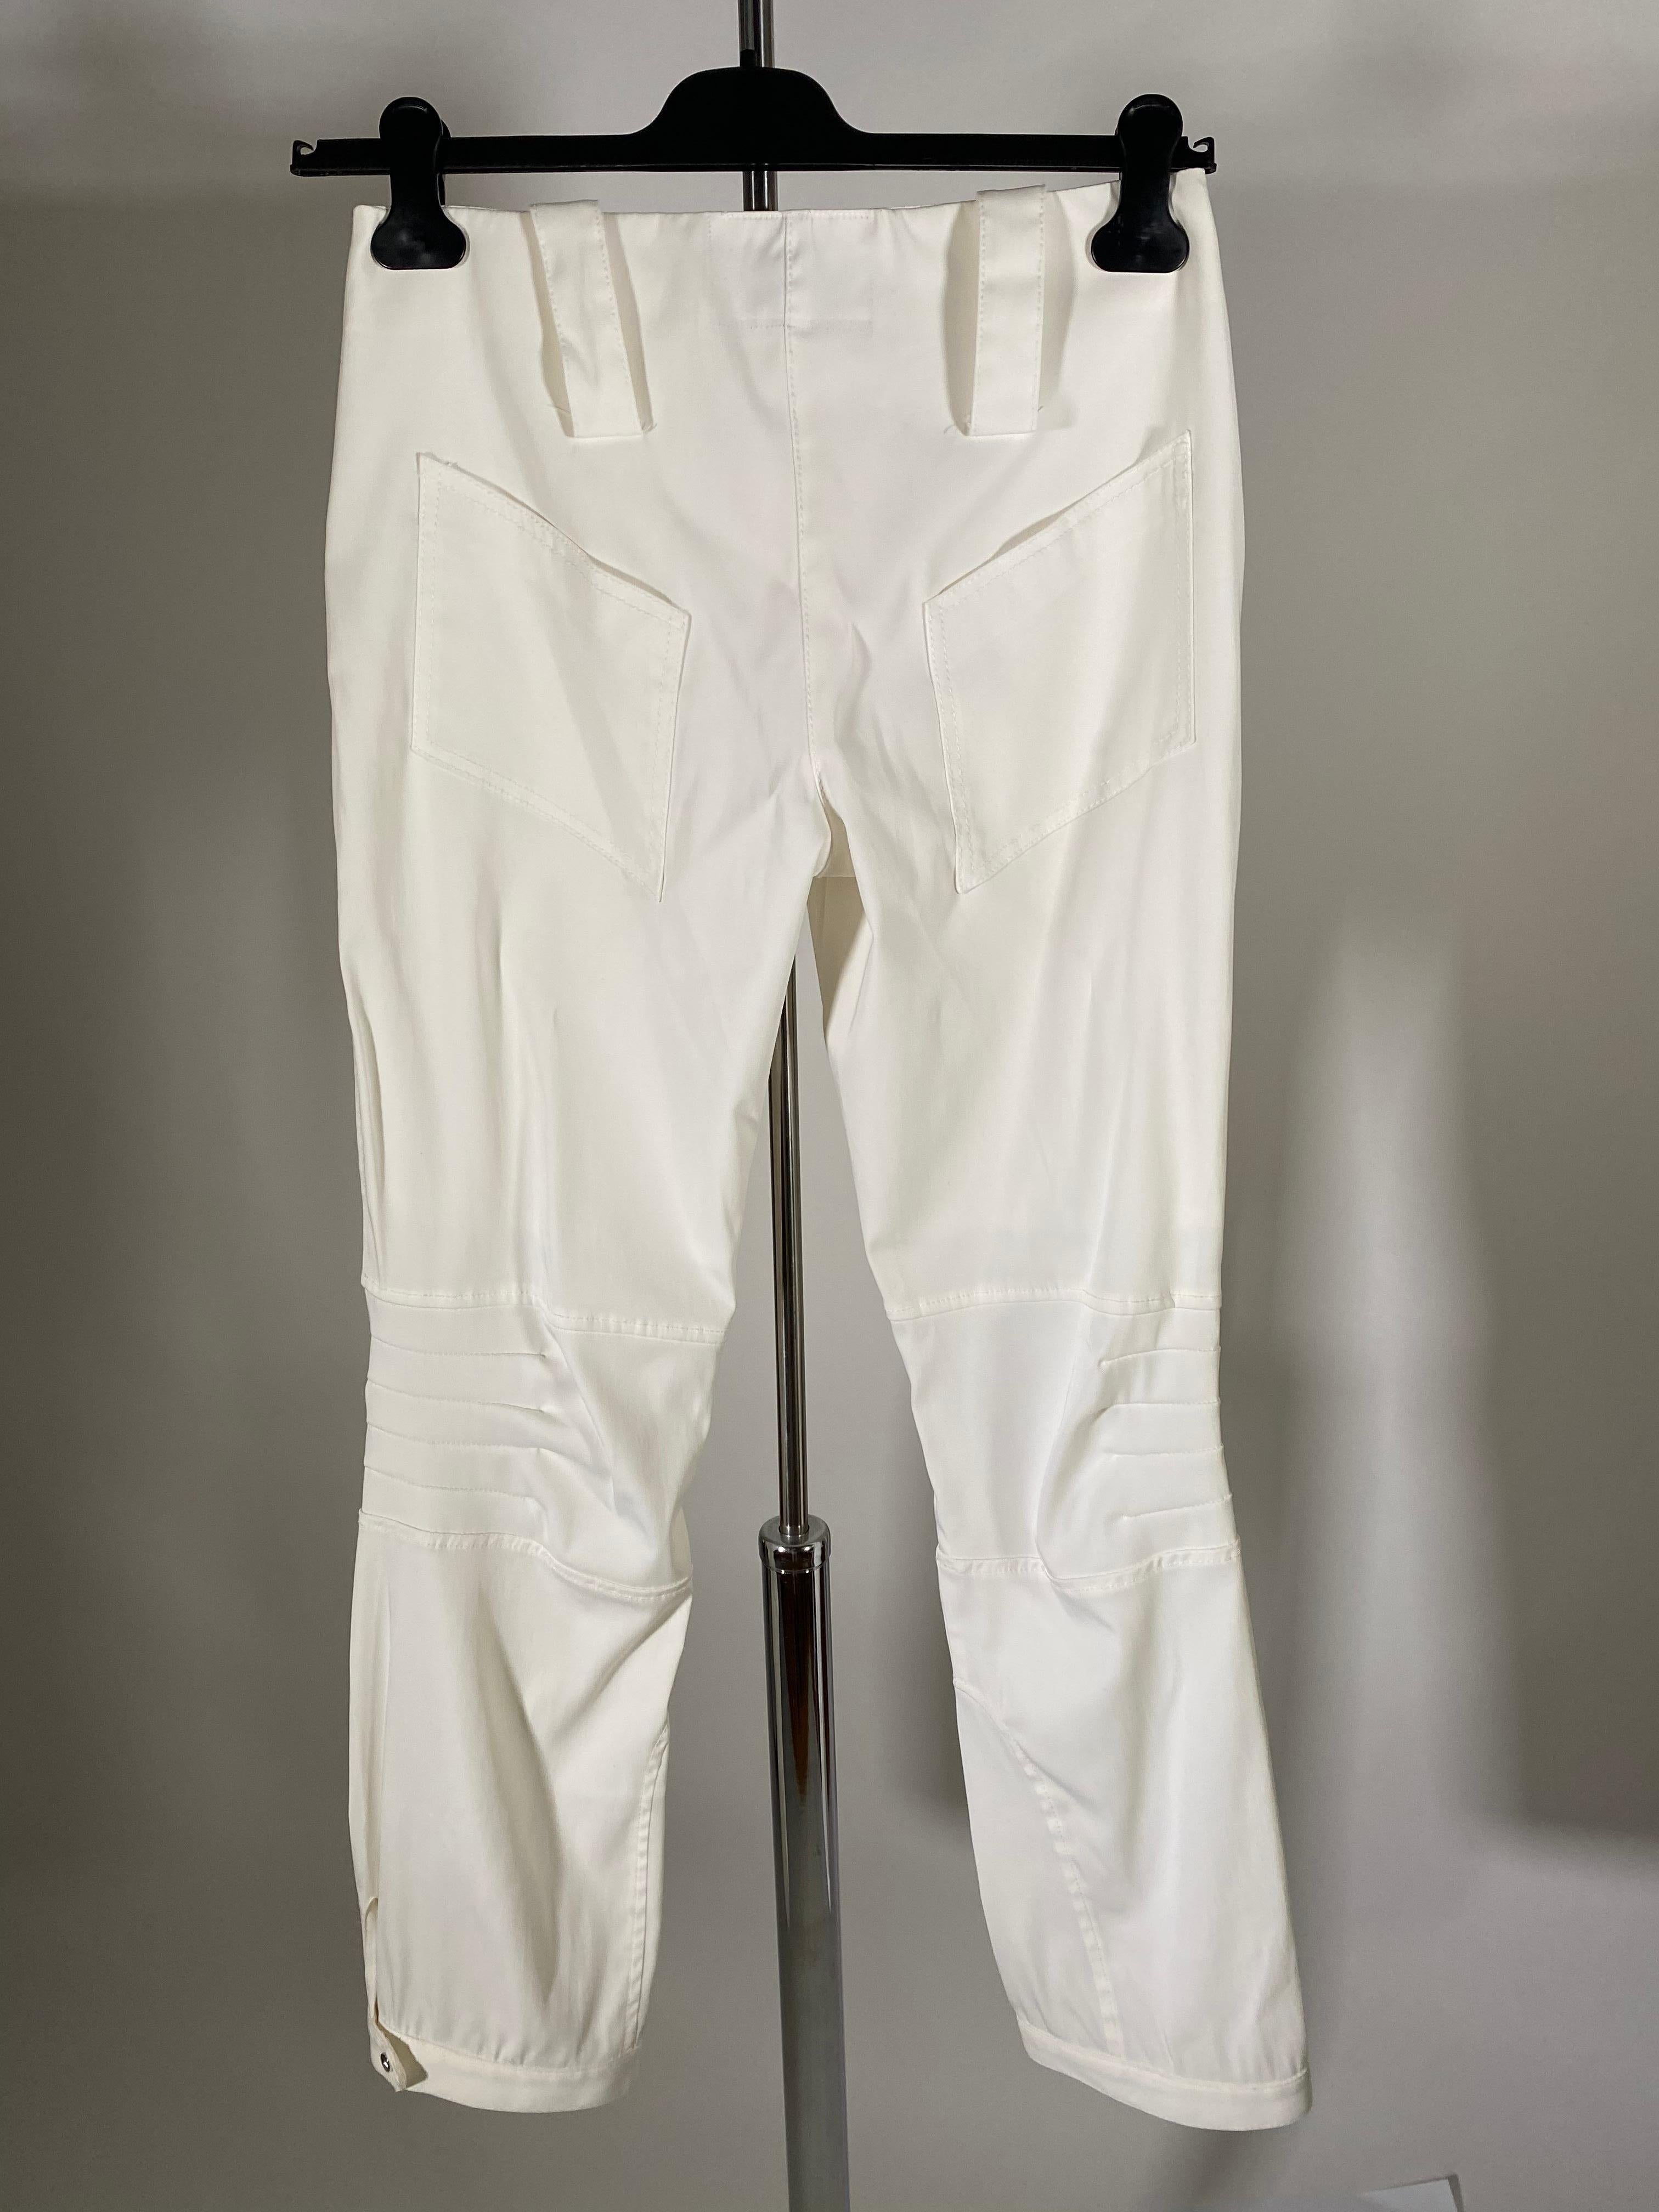 Vintage Thierry Mugler white pants
New with tags
Approximate measurements 
Waist 30”
Length 39”
Final sale